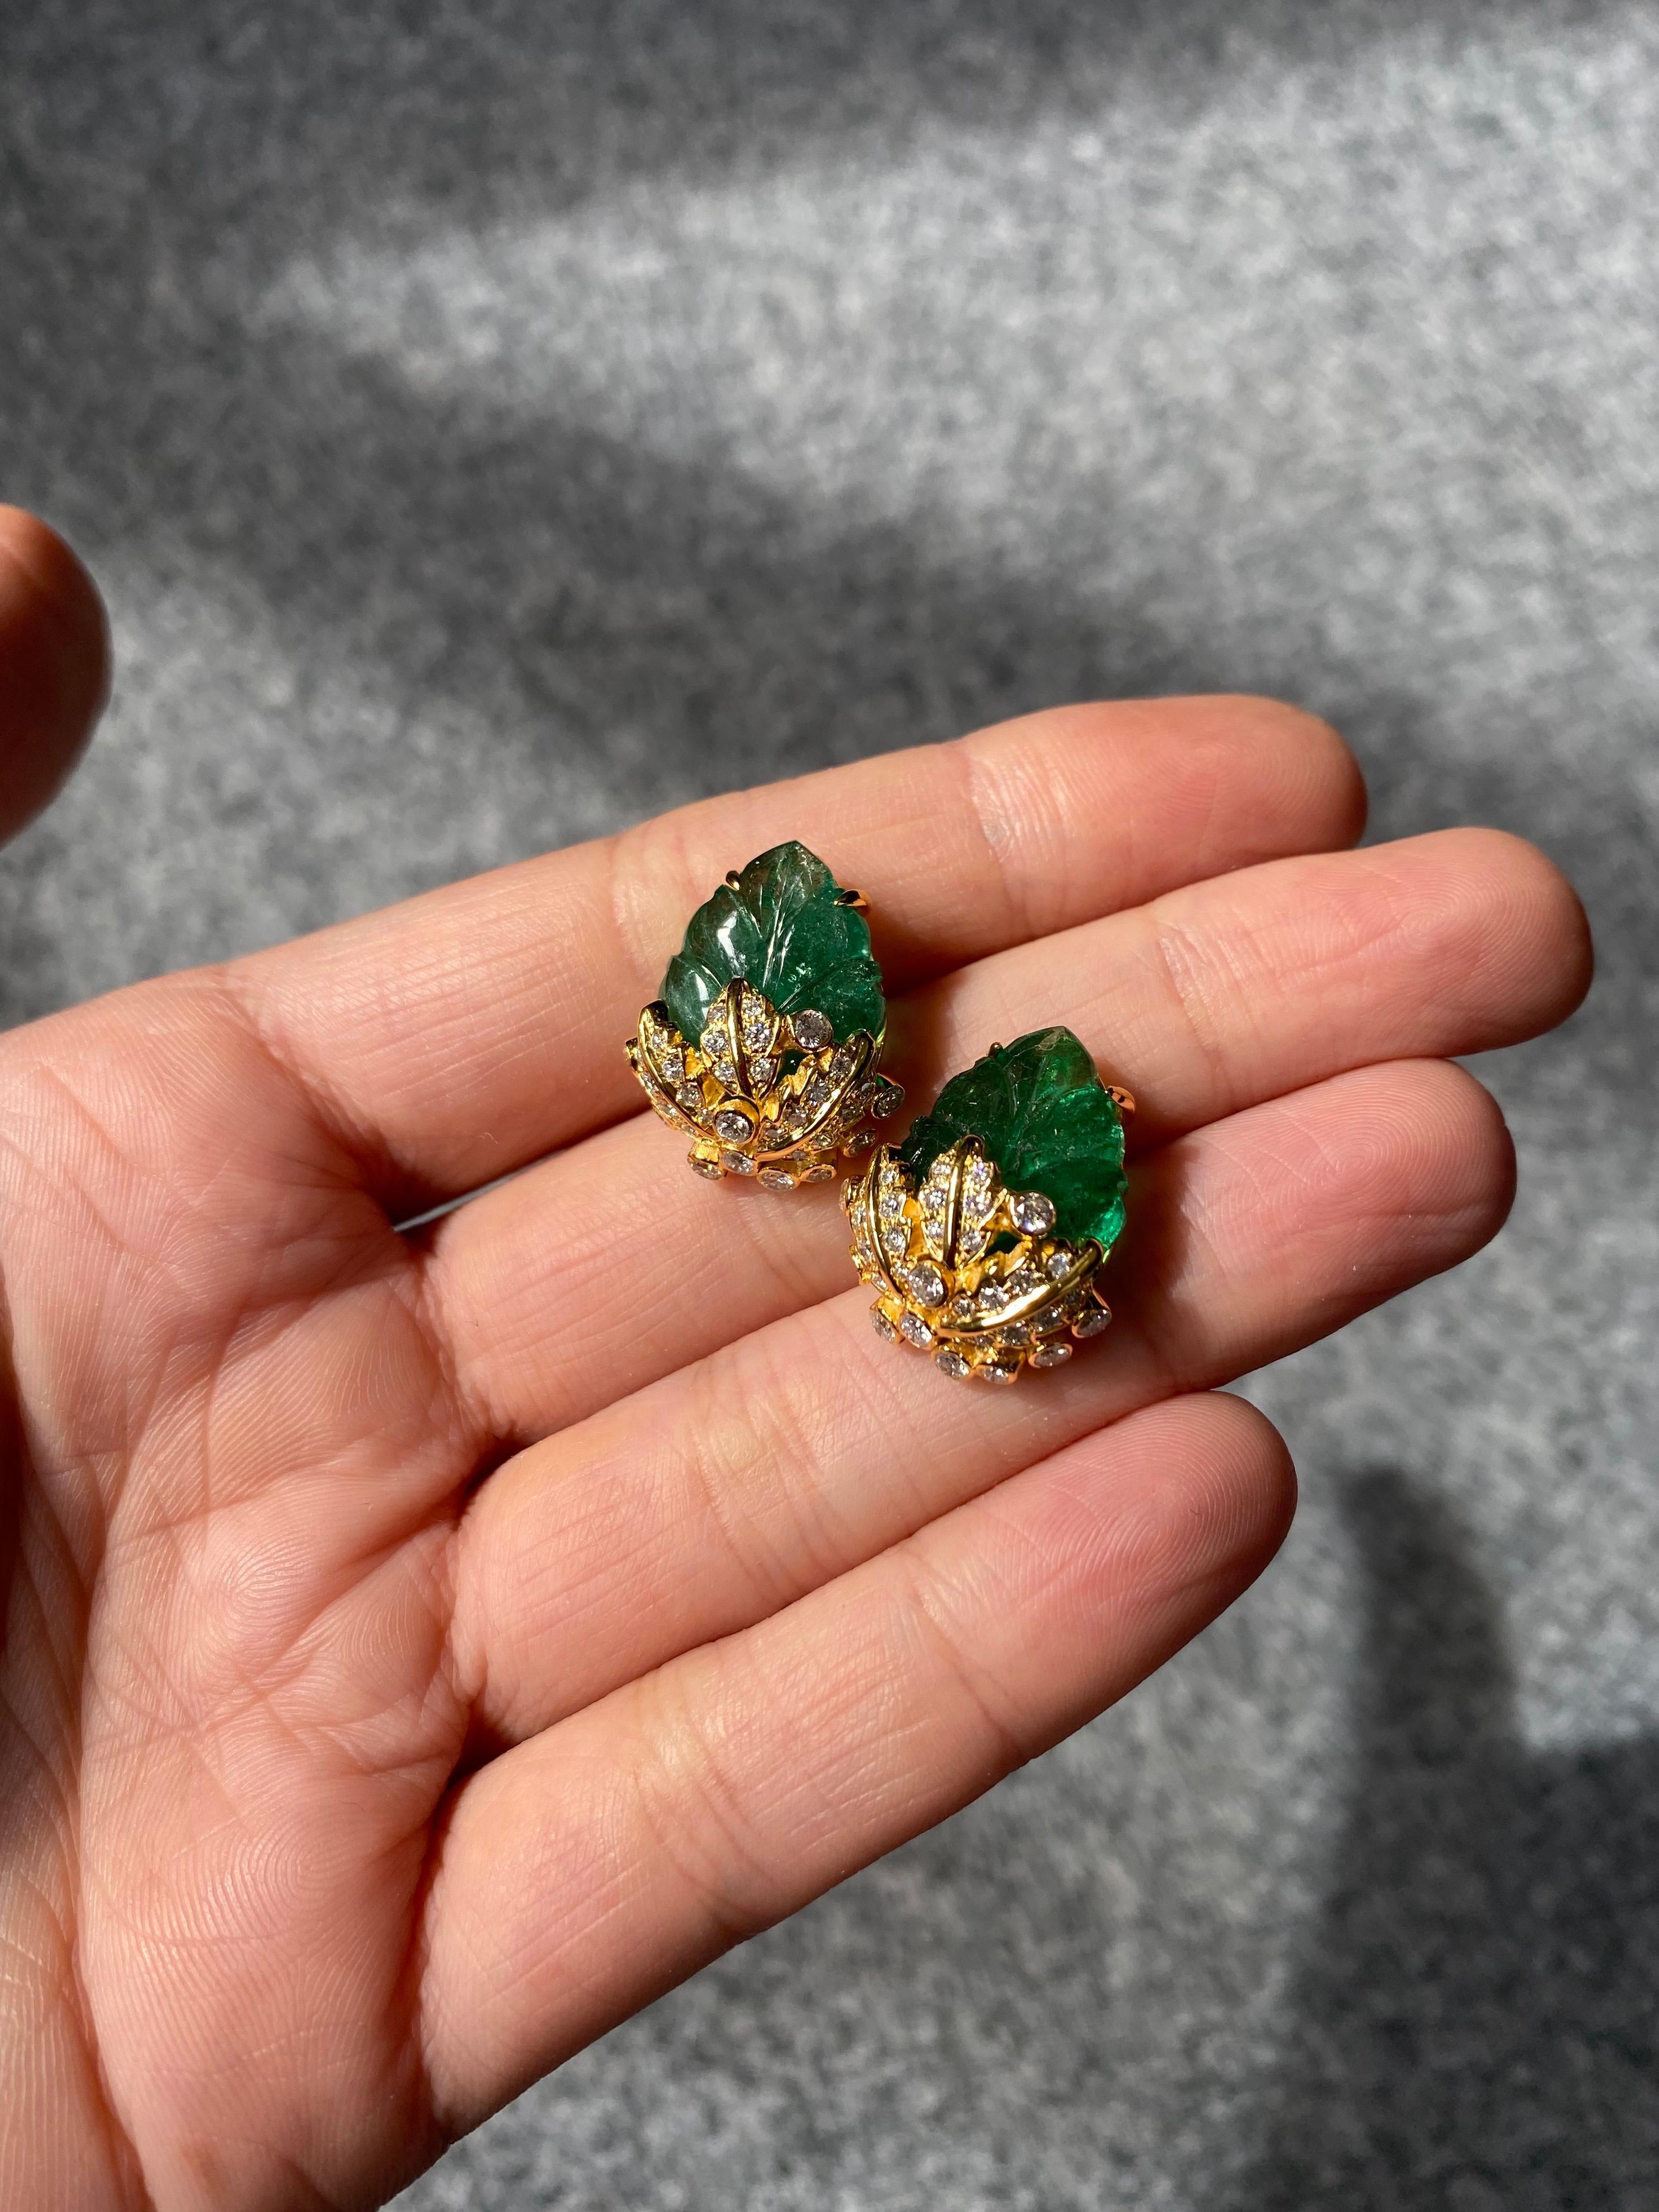 One of a kind, art-deco style, hand-carved 17.01 natural Zambian Emerald and 1.2 carat  White Diamond studs, set in 8 grams of solid 18K Yellow Gold. The design of the earrings are truly unique, and make the yellow gold really enhance the beauty of